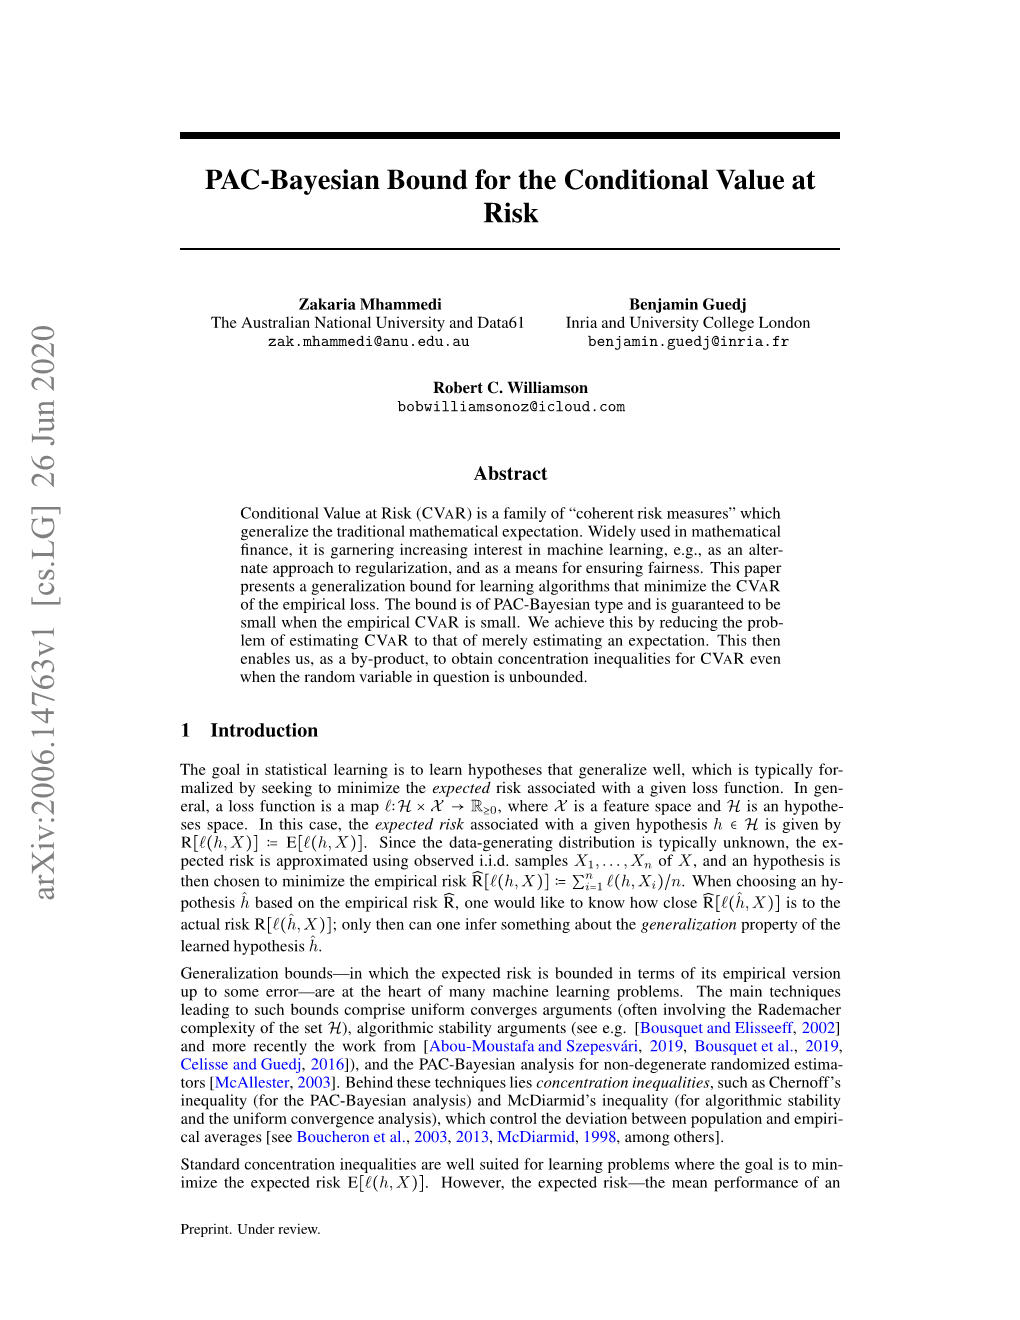 PAC-Bayesian Bound for the Conditional Value at Risk